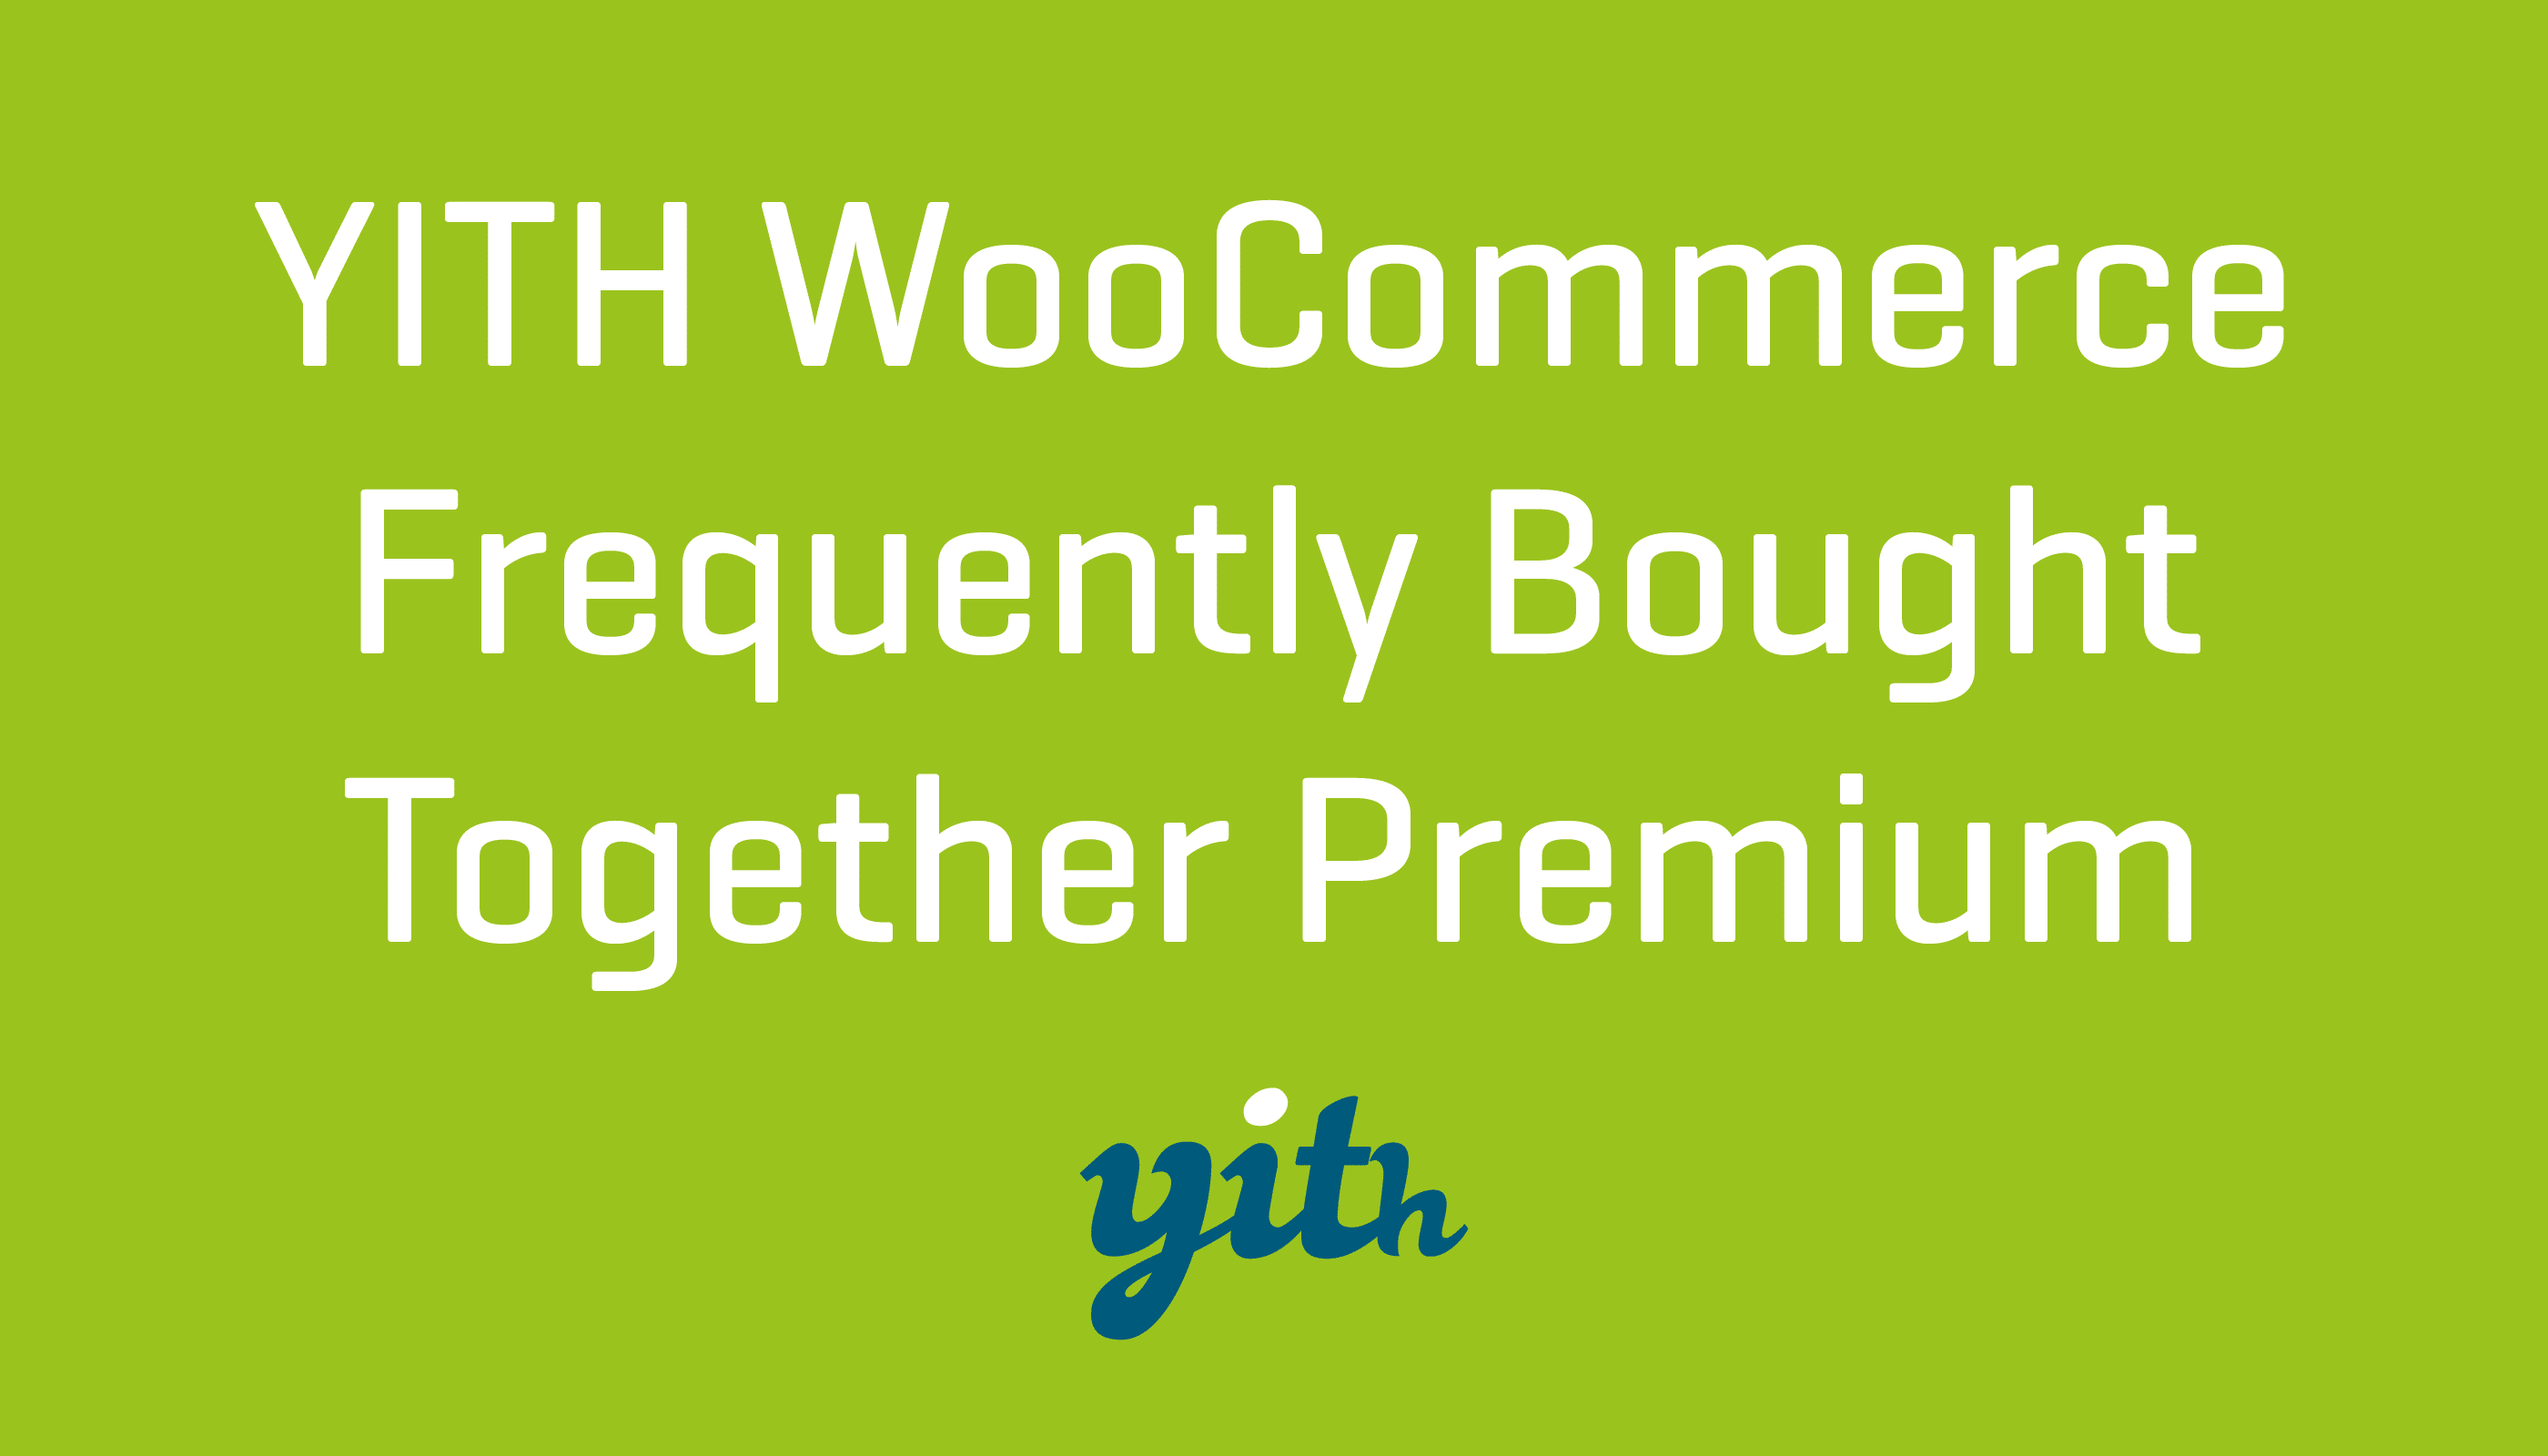 YITH WooCommerce Frequently Bought Together Premium Plugin